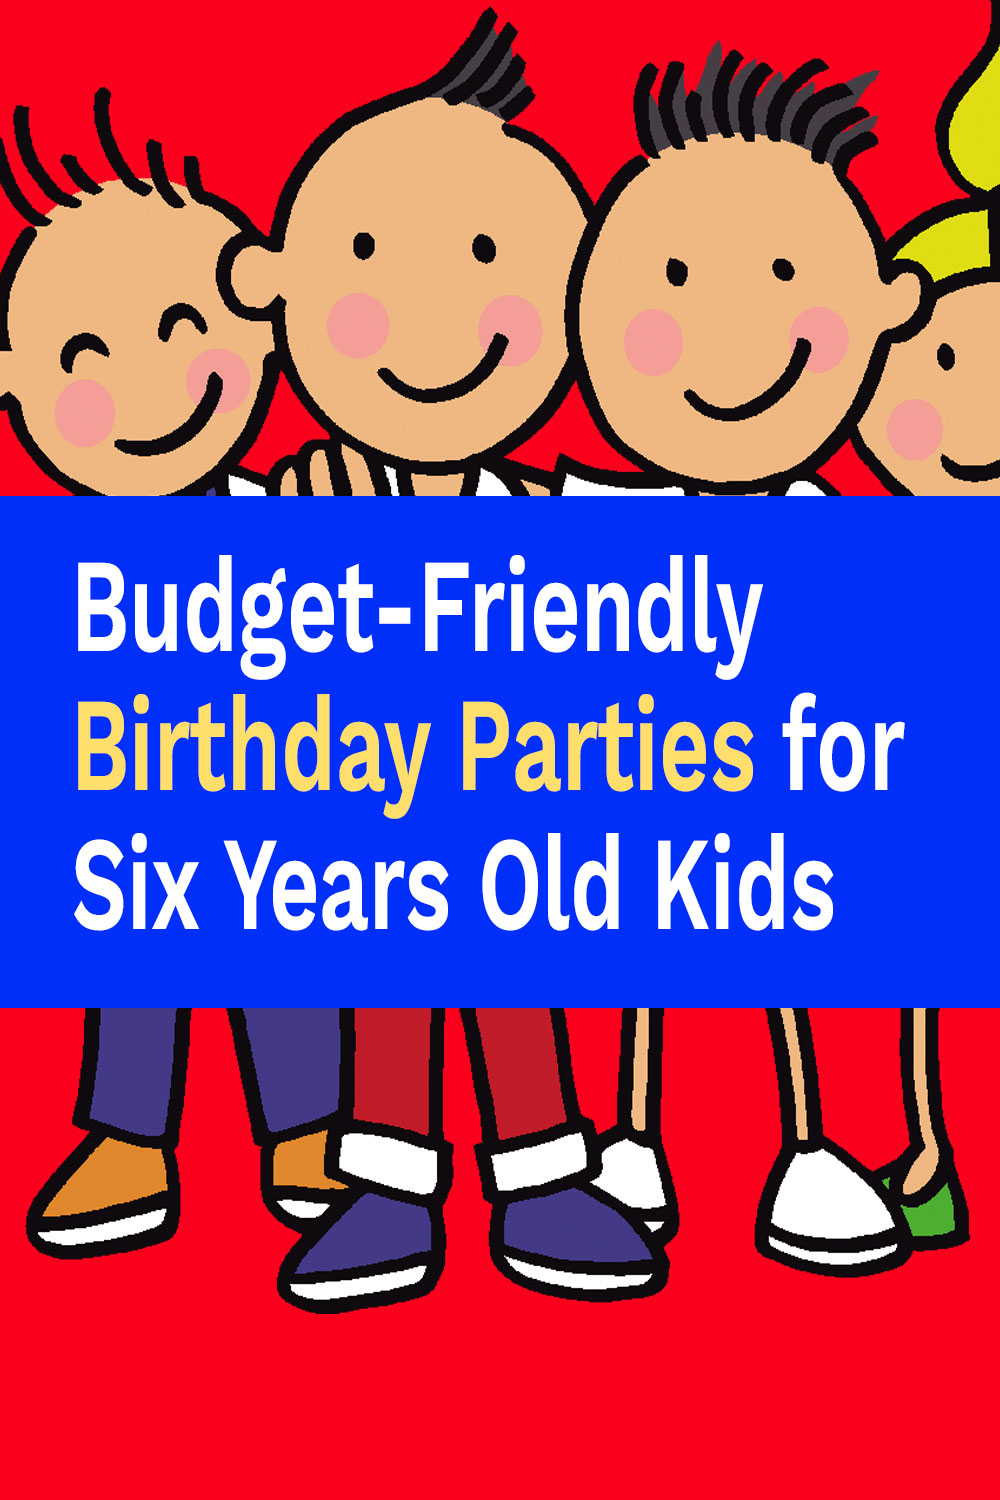 Budget-Friendly Birthday Parties for Six Years Old Kids